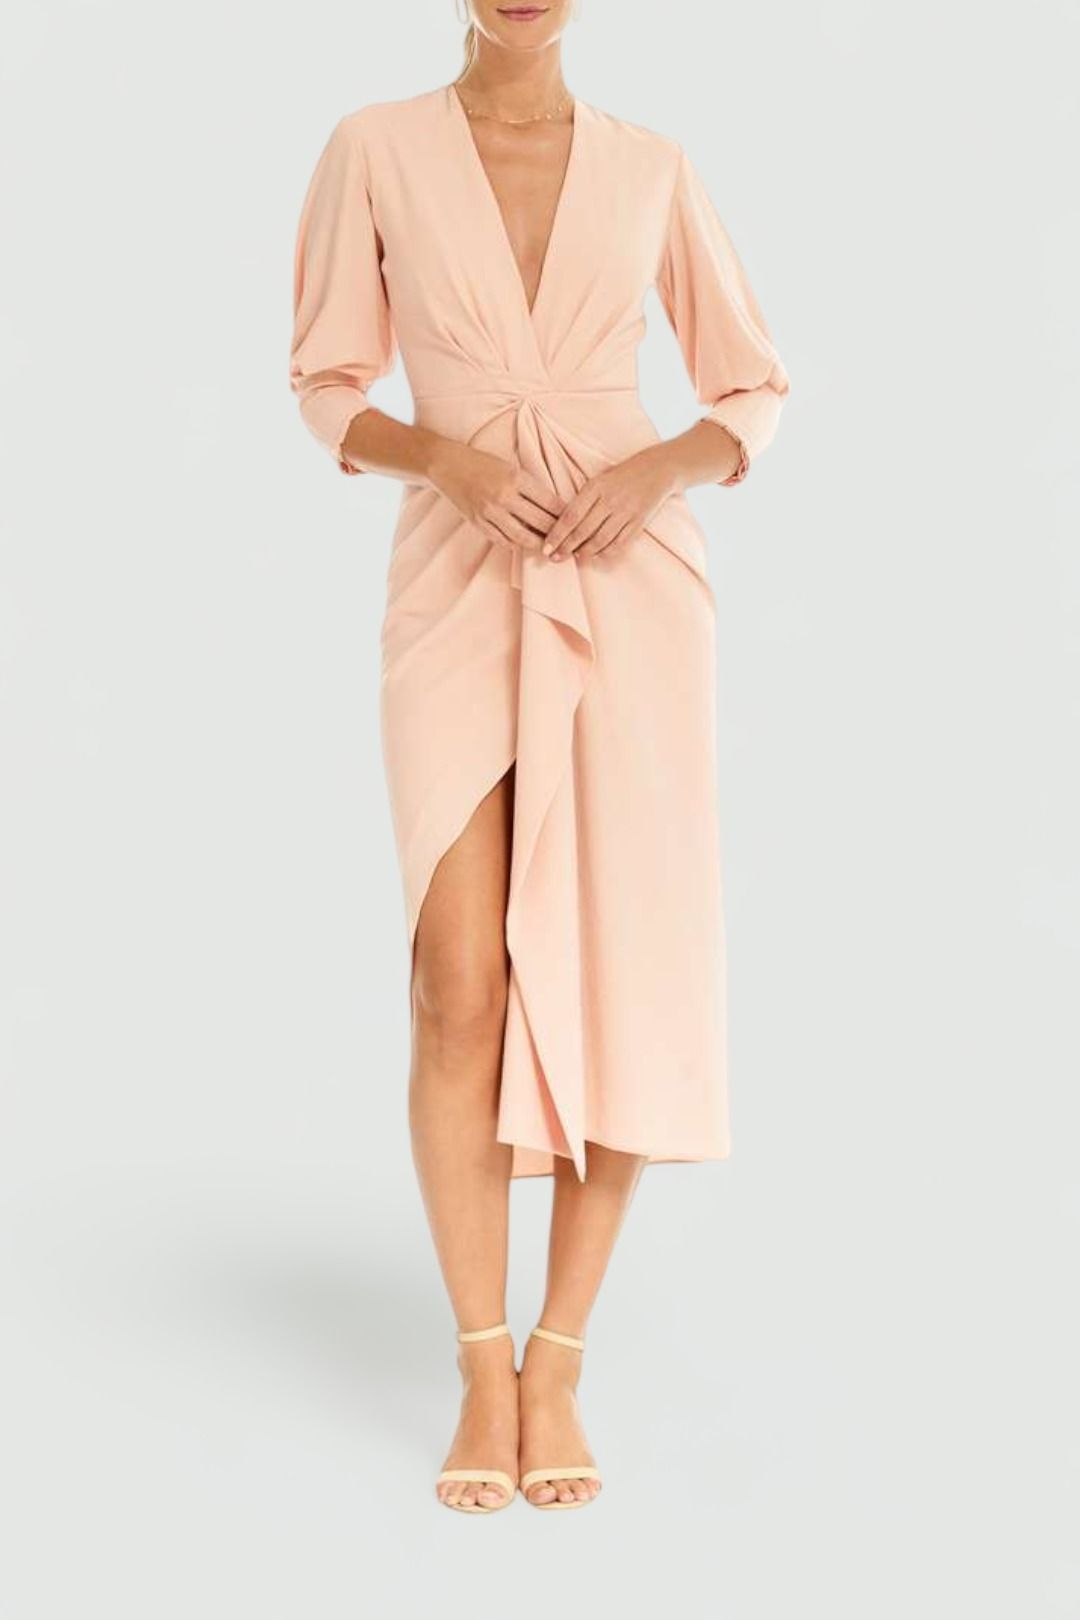 manning-cartell-free-fall-dress-rosewater-campaign